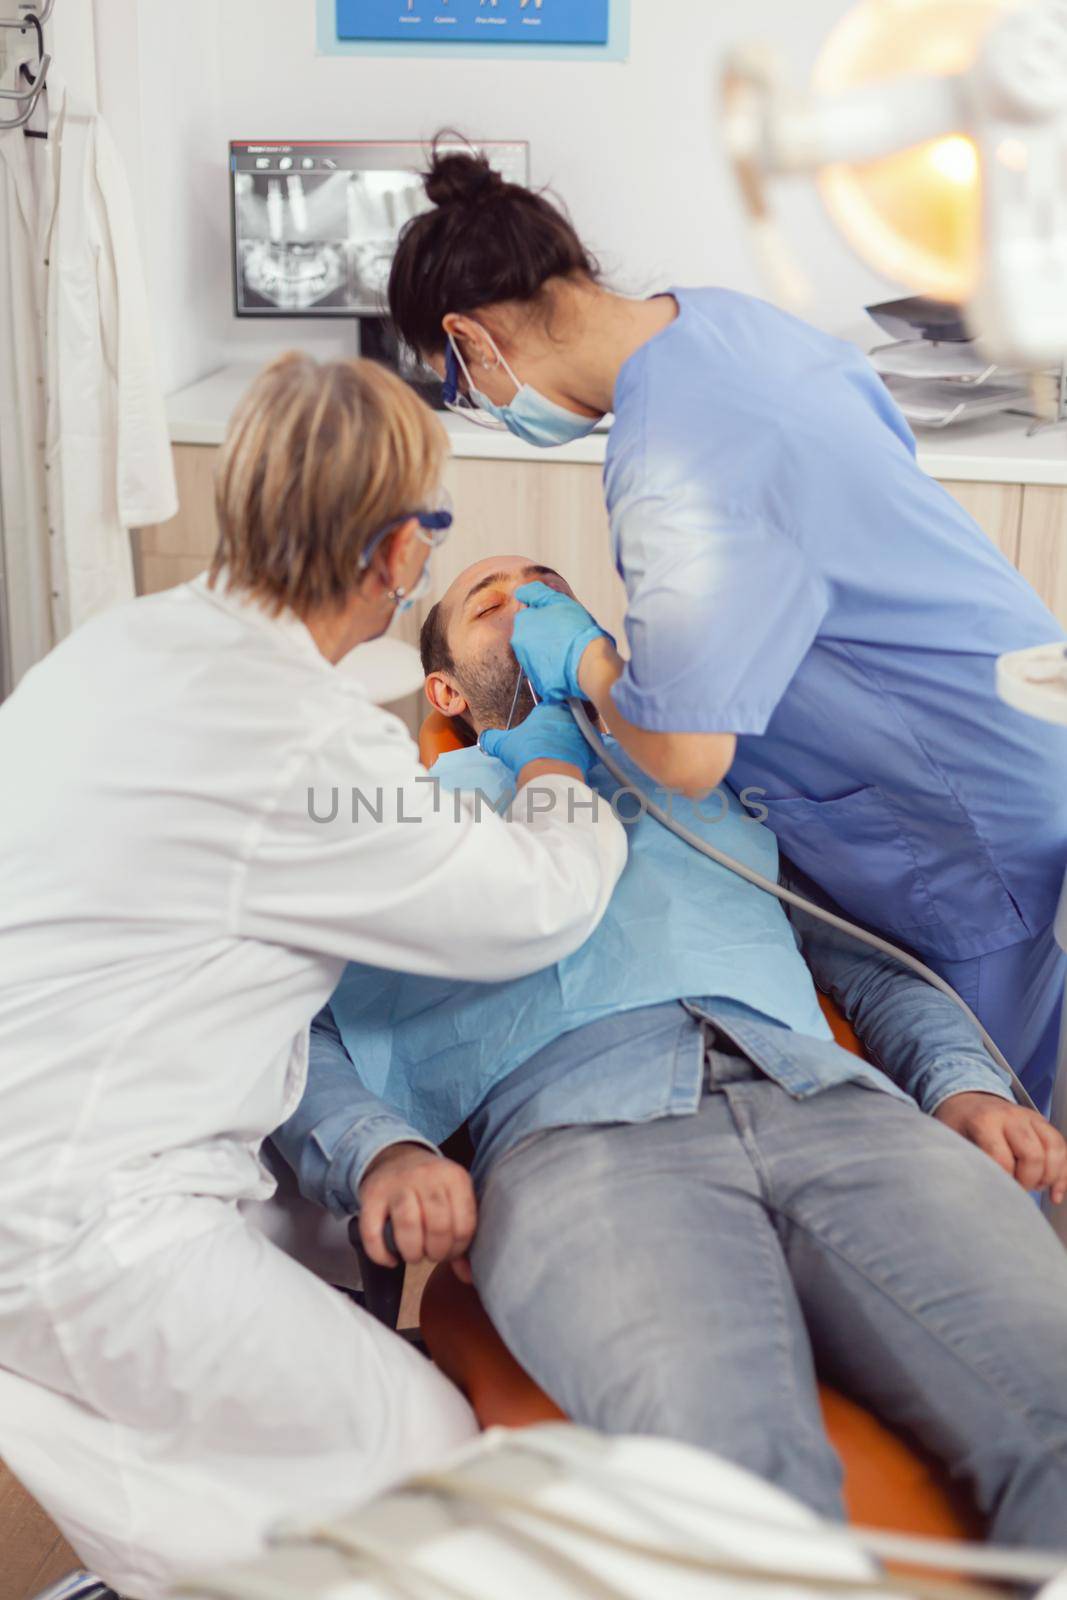 Senior woman technician checking teeth examining sick patient sitting on stomatological chair. Doctor speaking to man while nurse cleaning mouth during dental examination in stomatology clinic